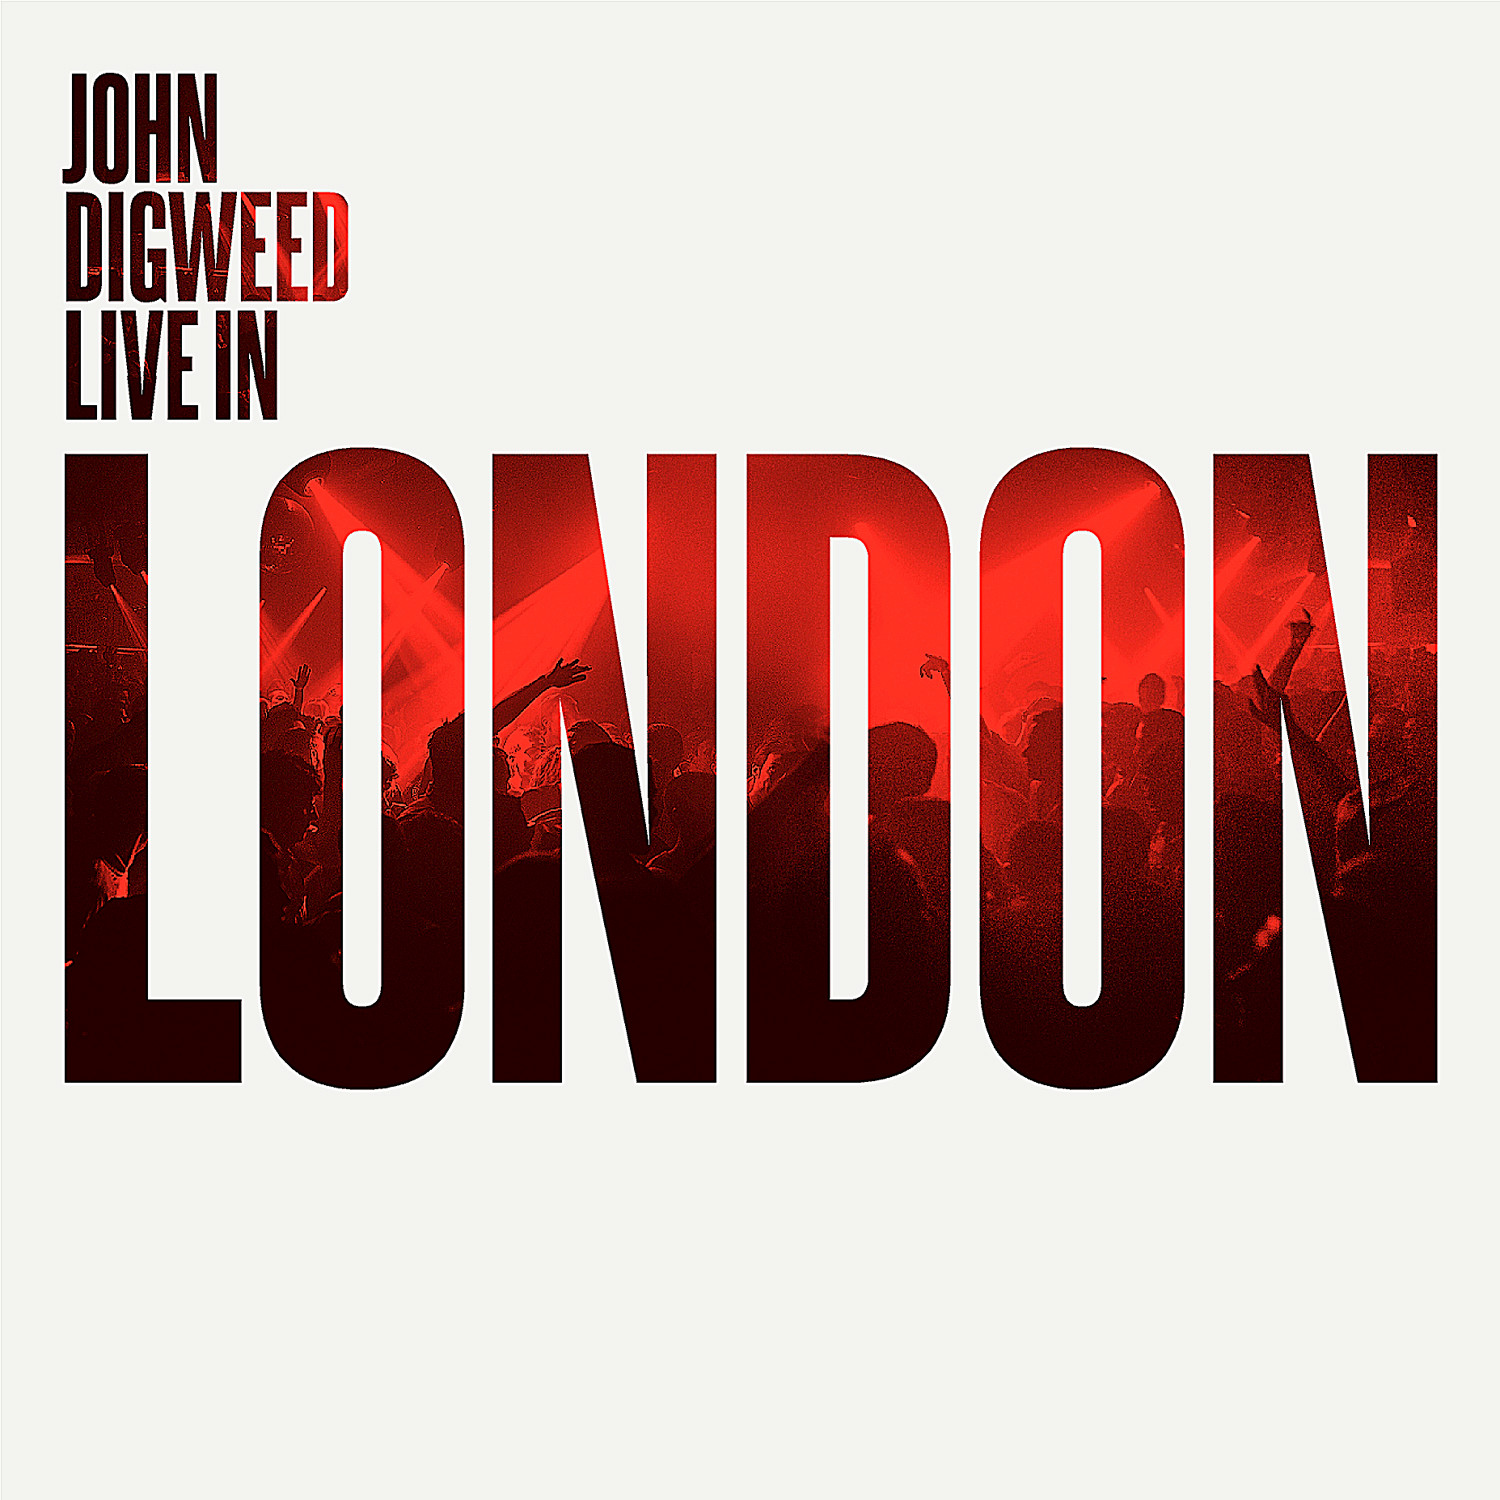 John ******* - Live in London CD1 Continuous Mix